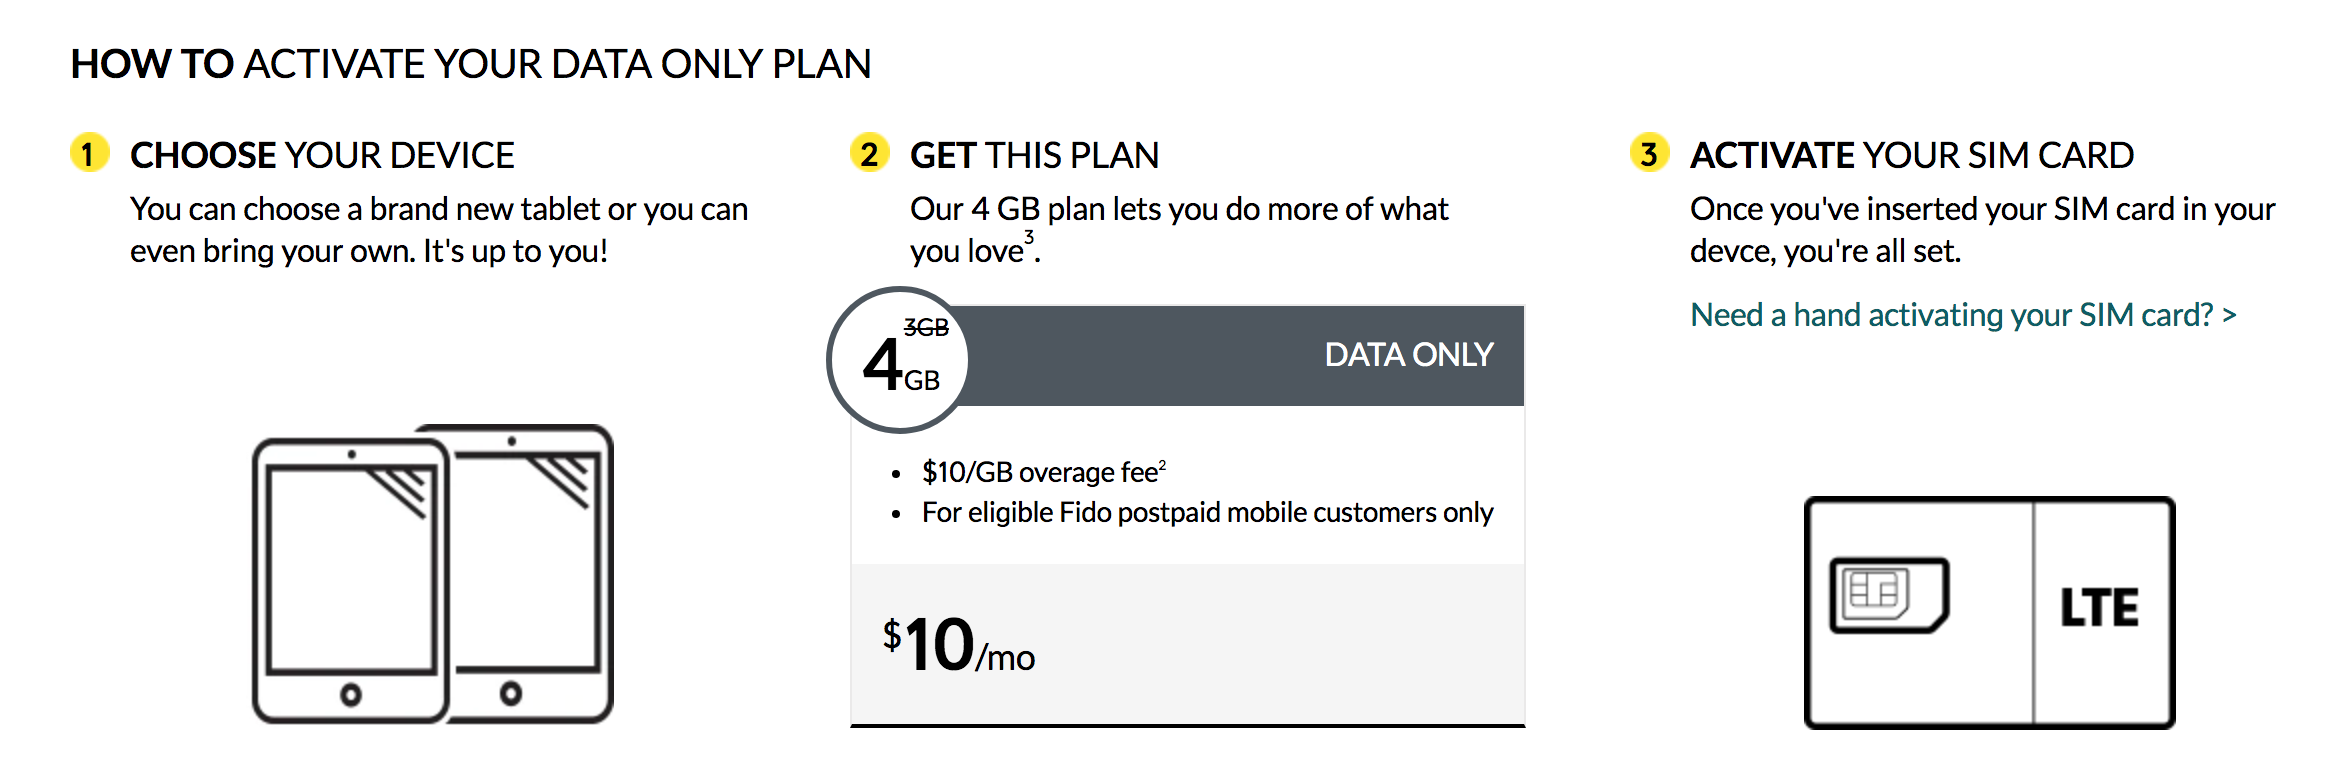 Fido offering customers 4GB for $10 per month tablet plan